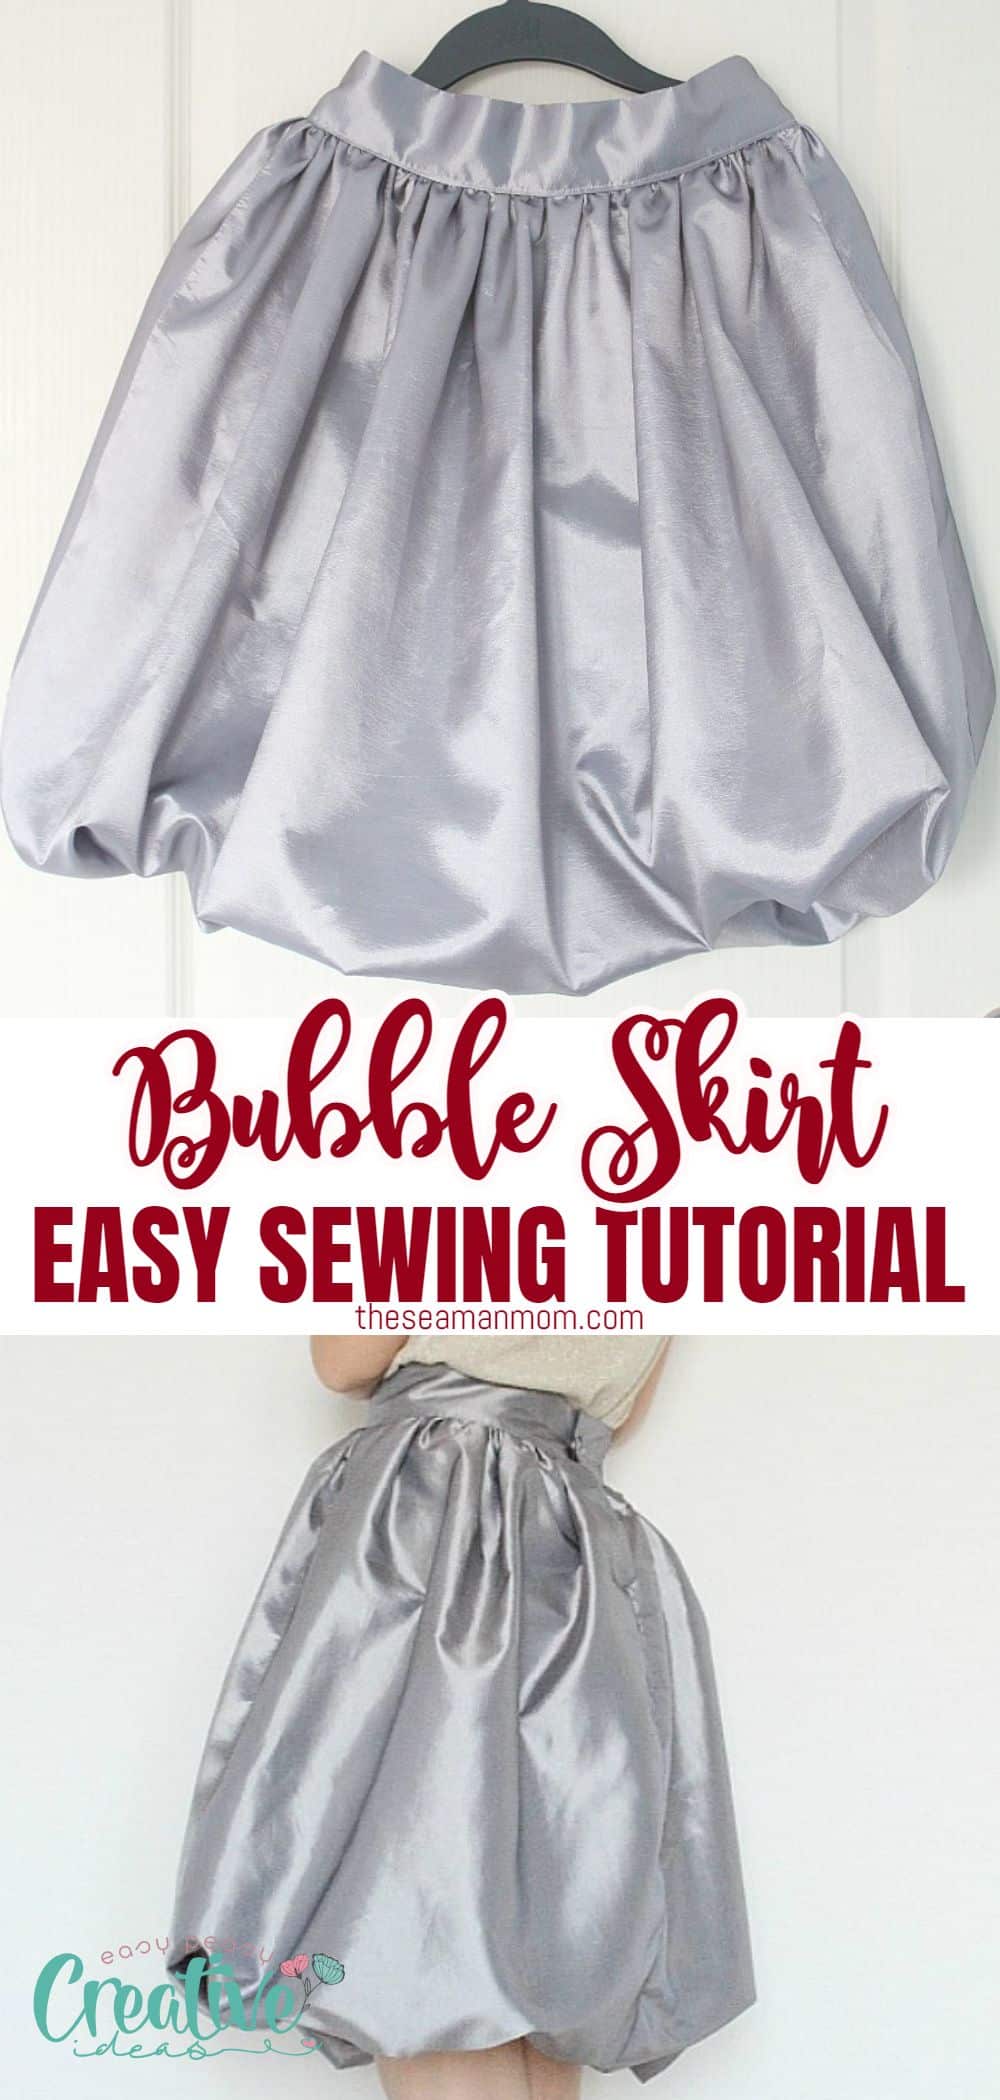 Bubble skirt sewing tutorial